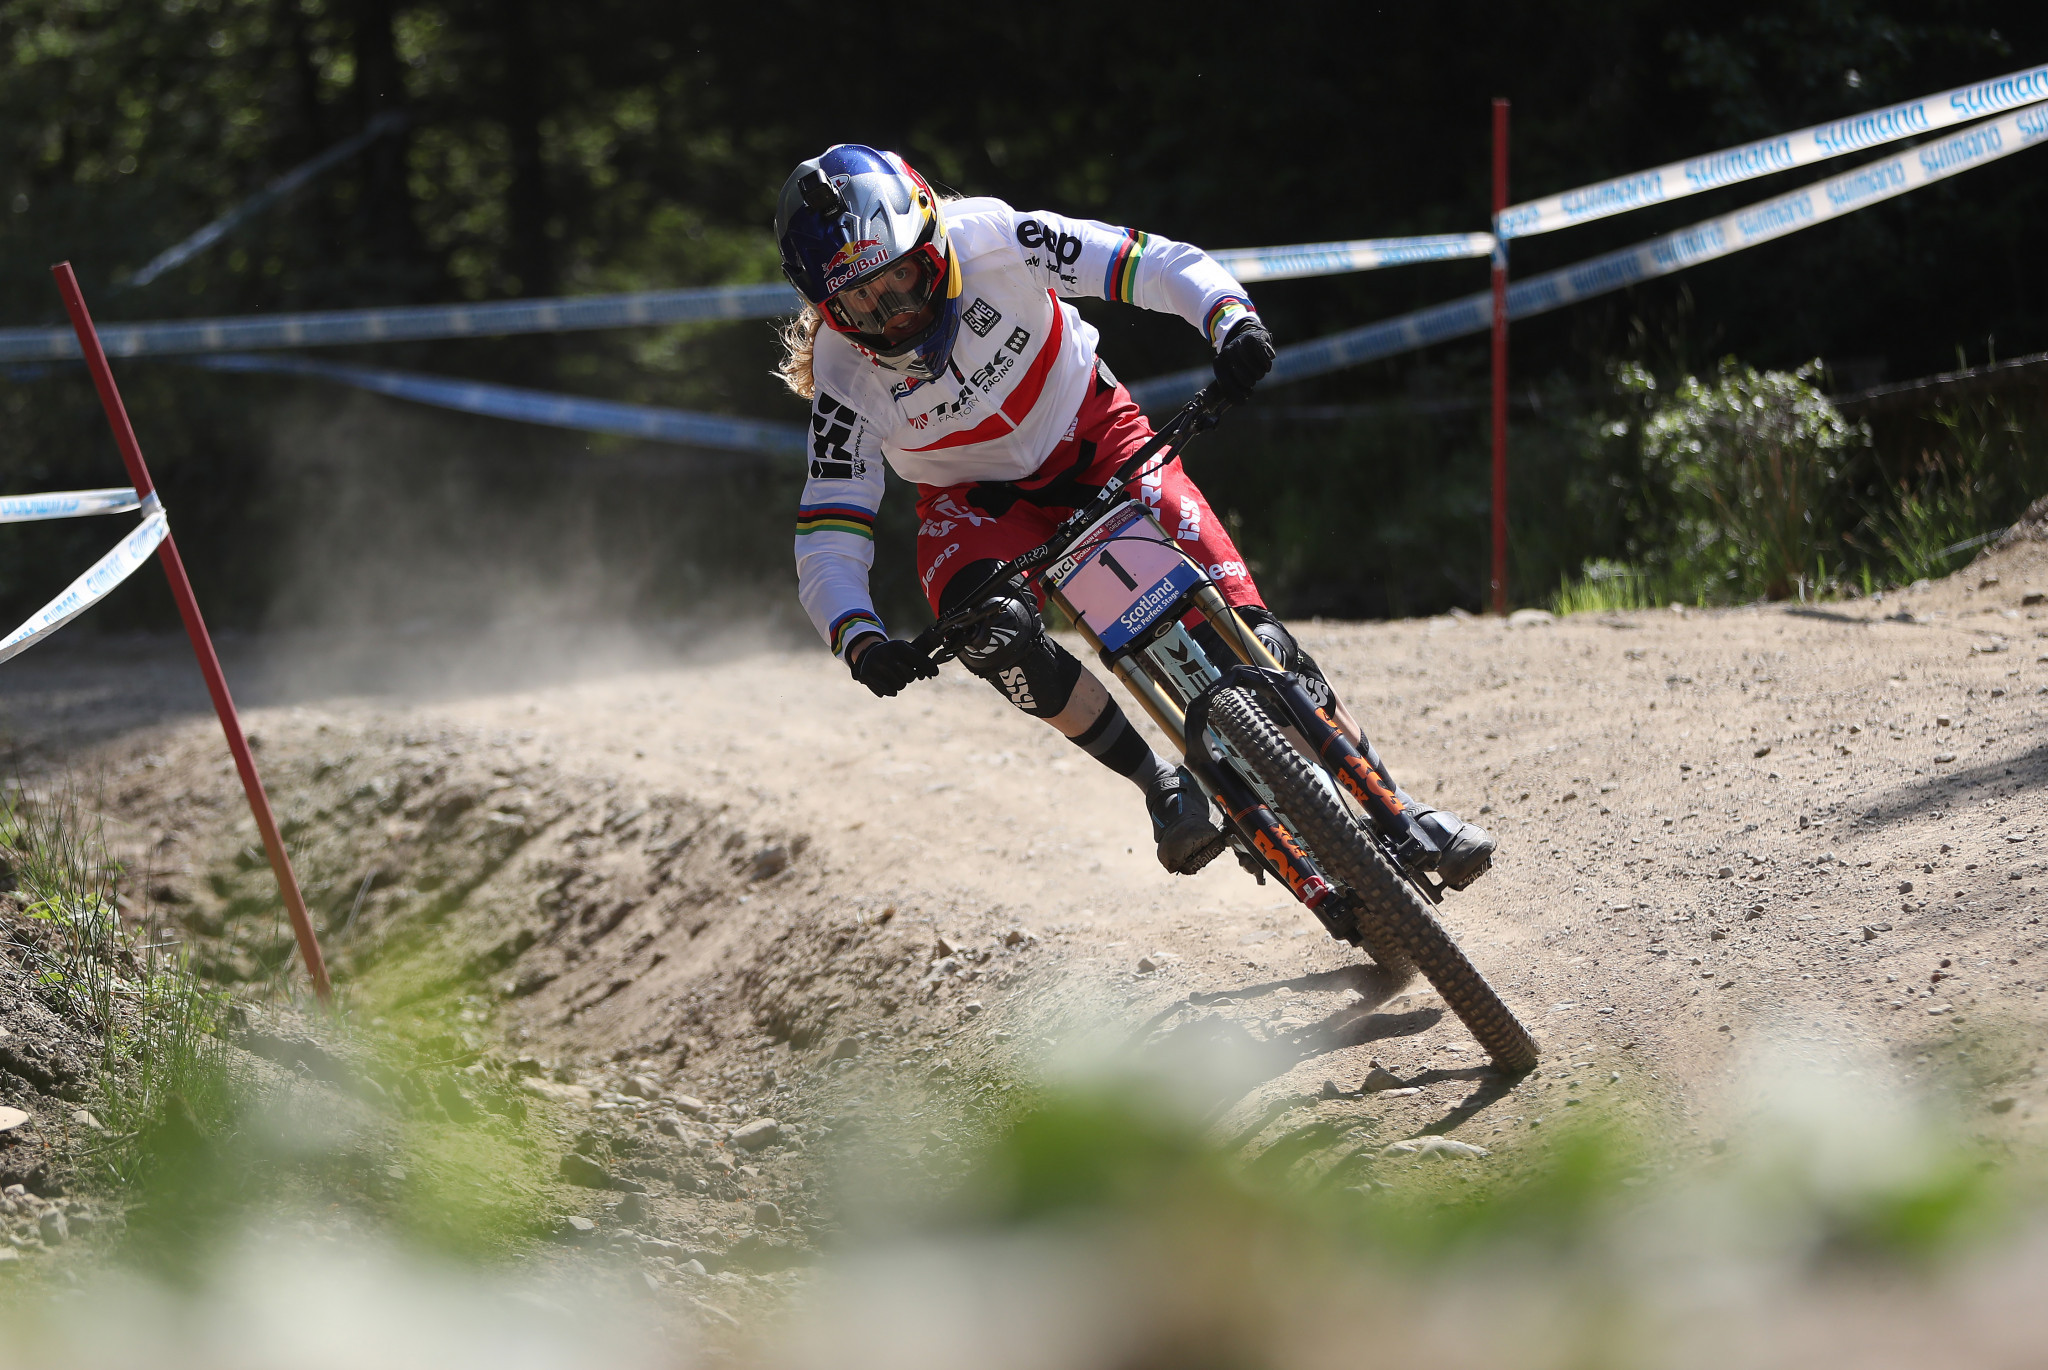 Scottish town Fort William is set to hold the second leg of the UCI Mountain Bike Downhill World Cup this weekend with five-time world champion Rachel Atherton looking to make her mark for hosts Great Britain ©Getty Images